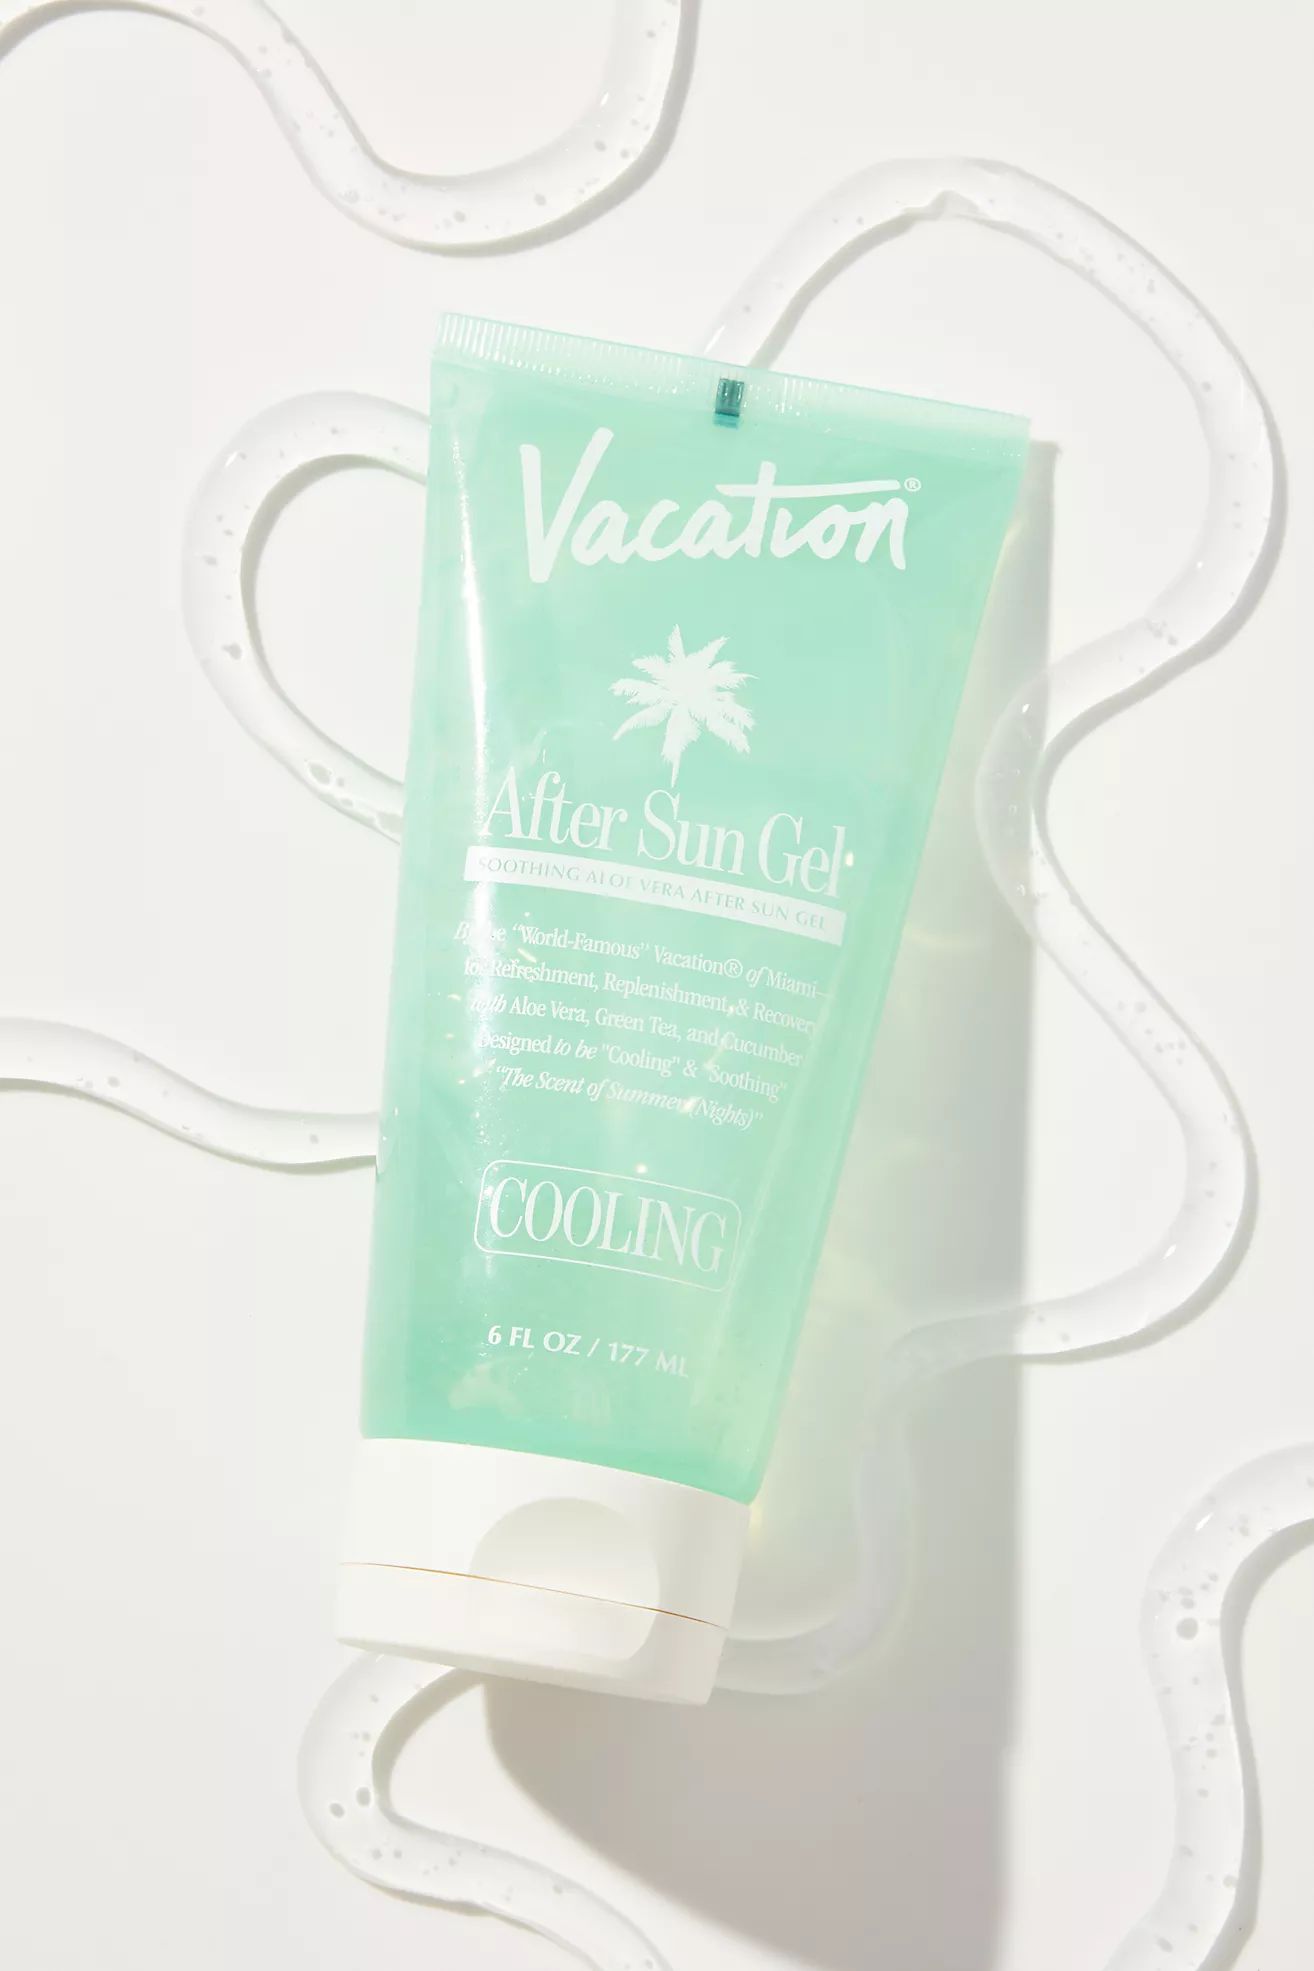 Vacation After Sun Gel | Anthropologie (US)